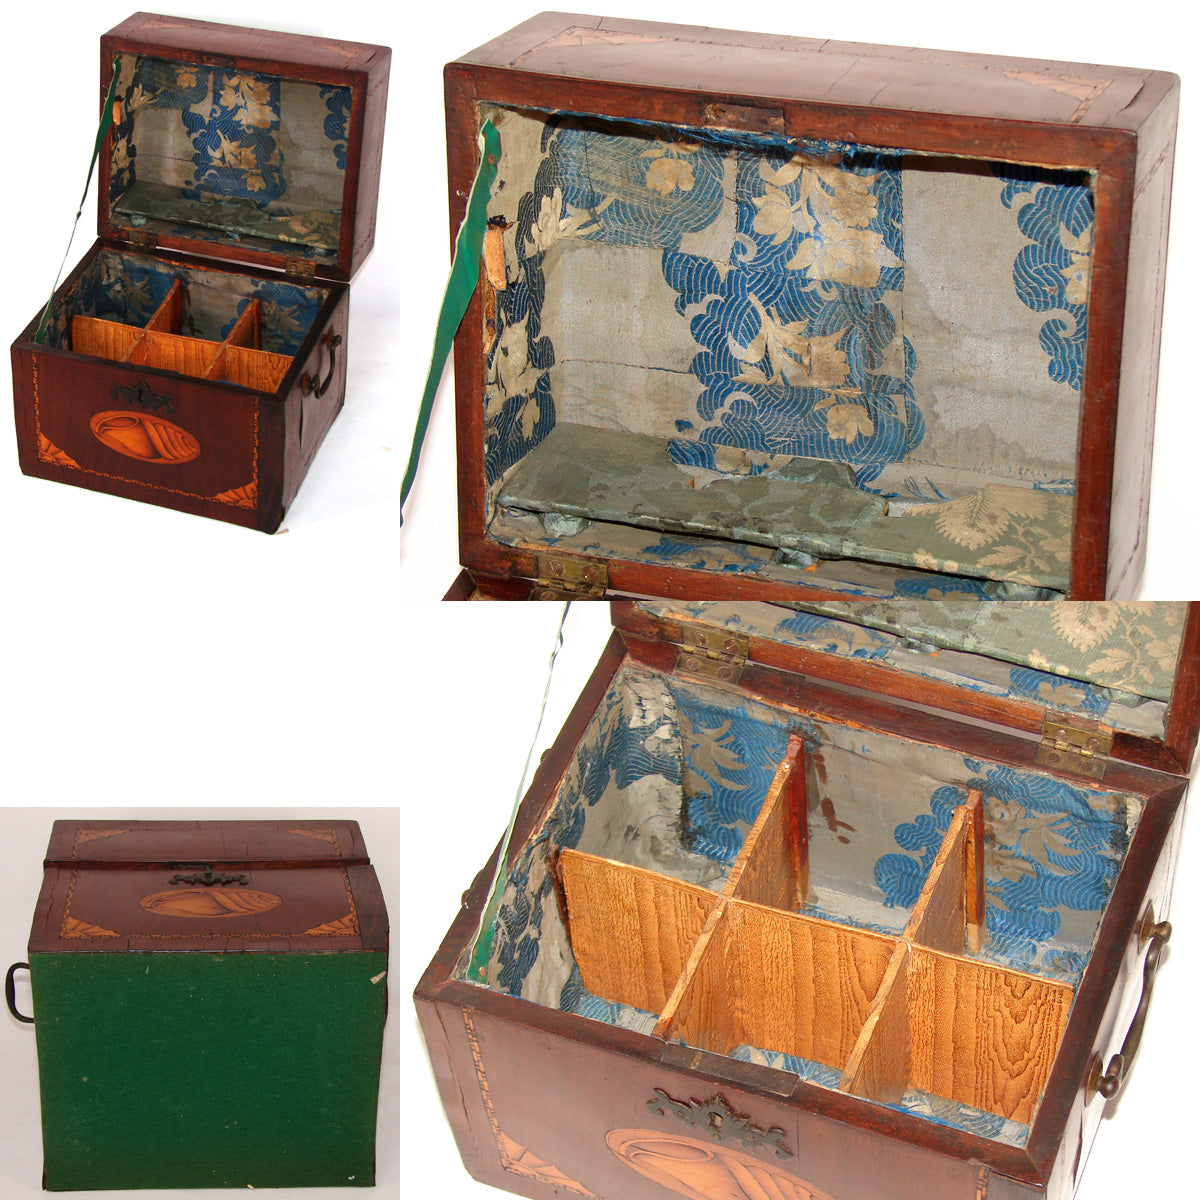 Superb c.1830 Ship Captain's Tantalus, Complete French or Dutch Marquetry Chest, Excellent